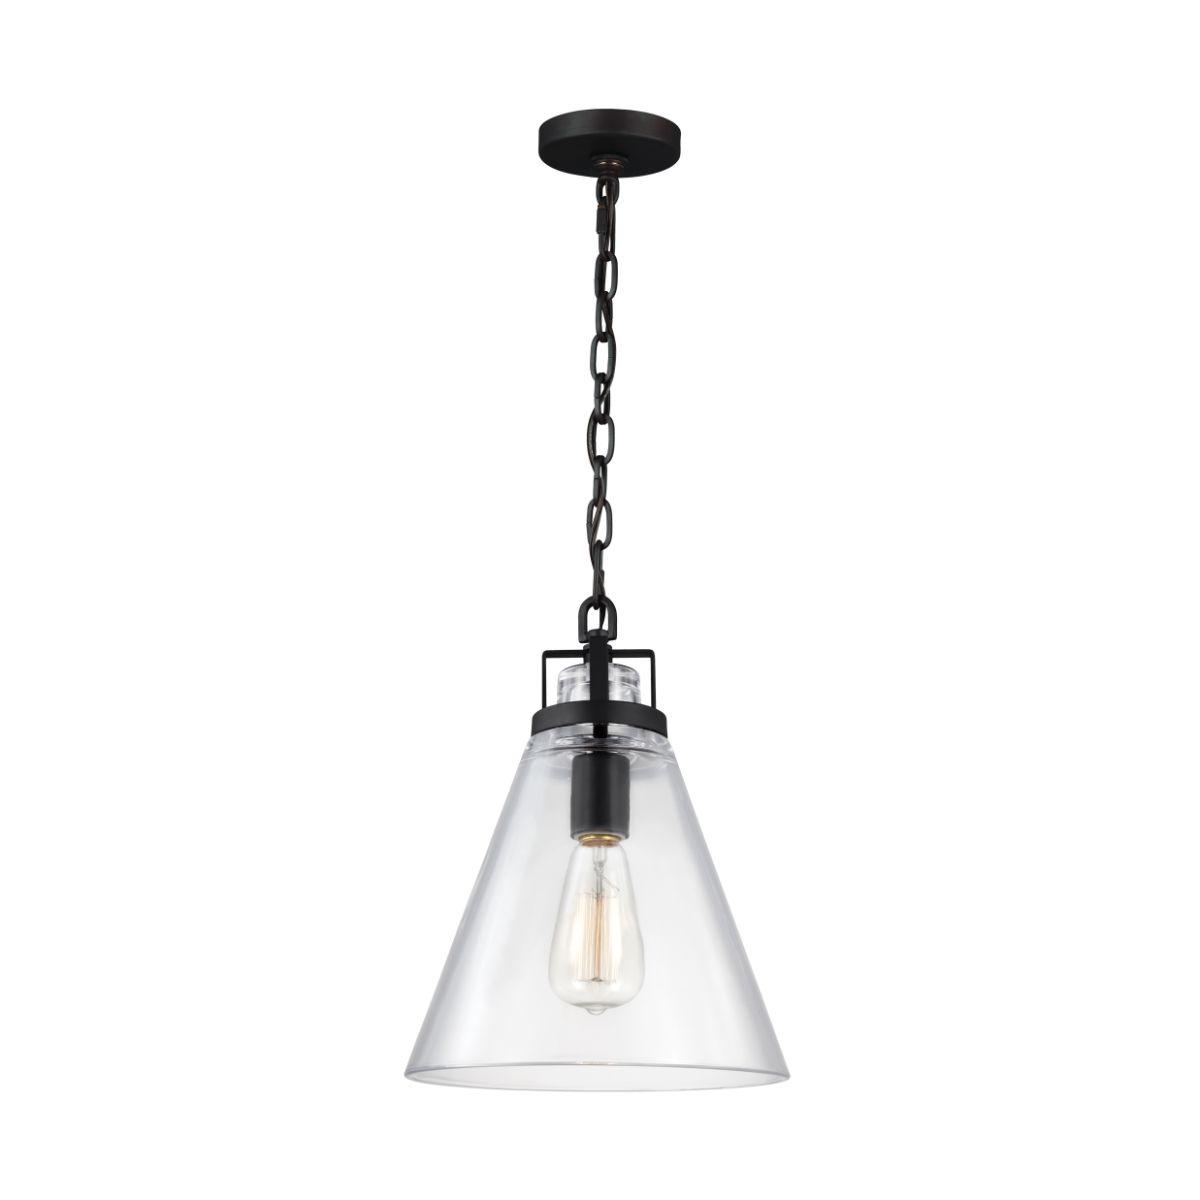 FRONTAGE 10 in. Pendant Light